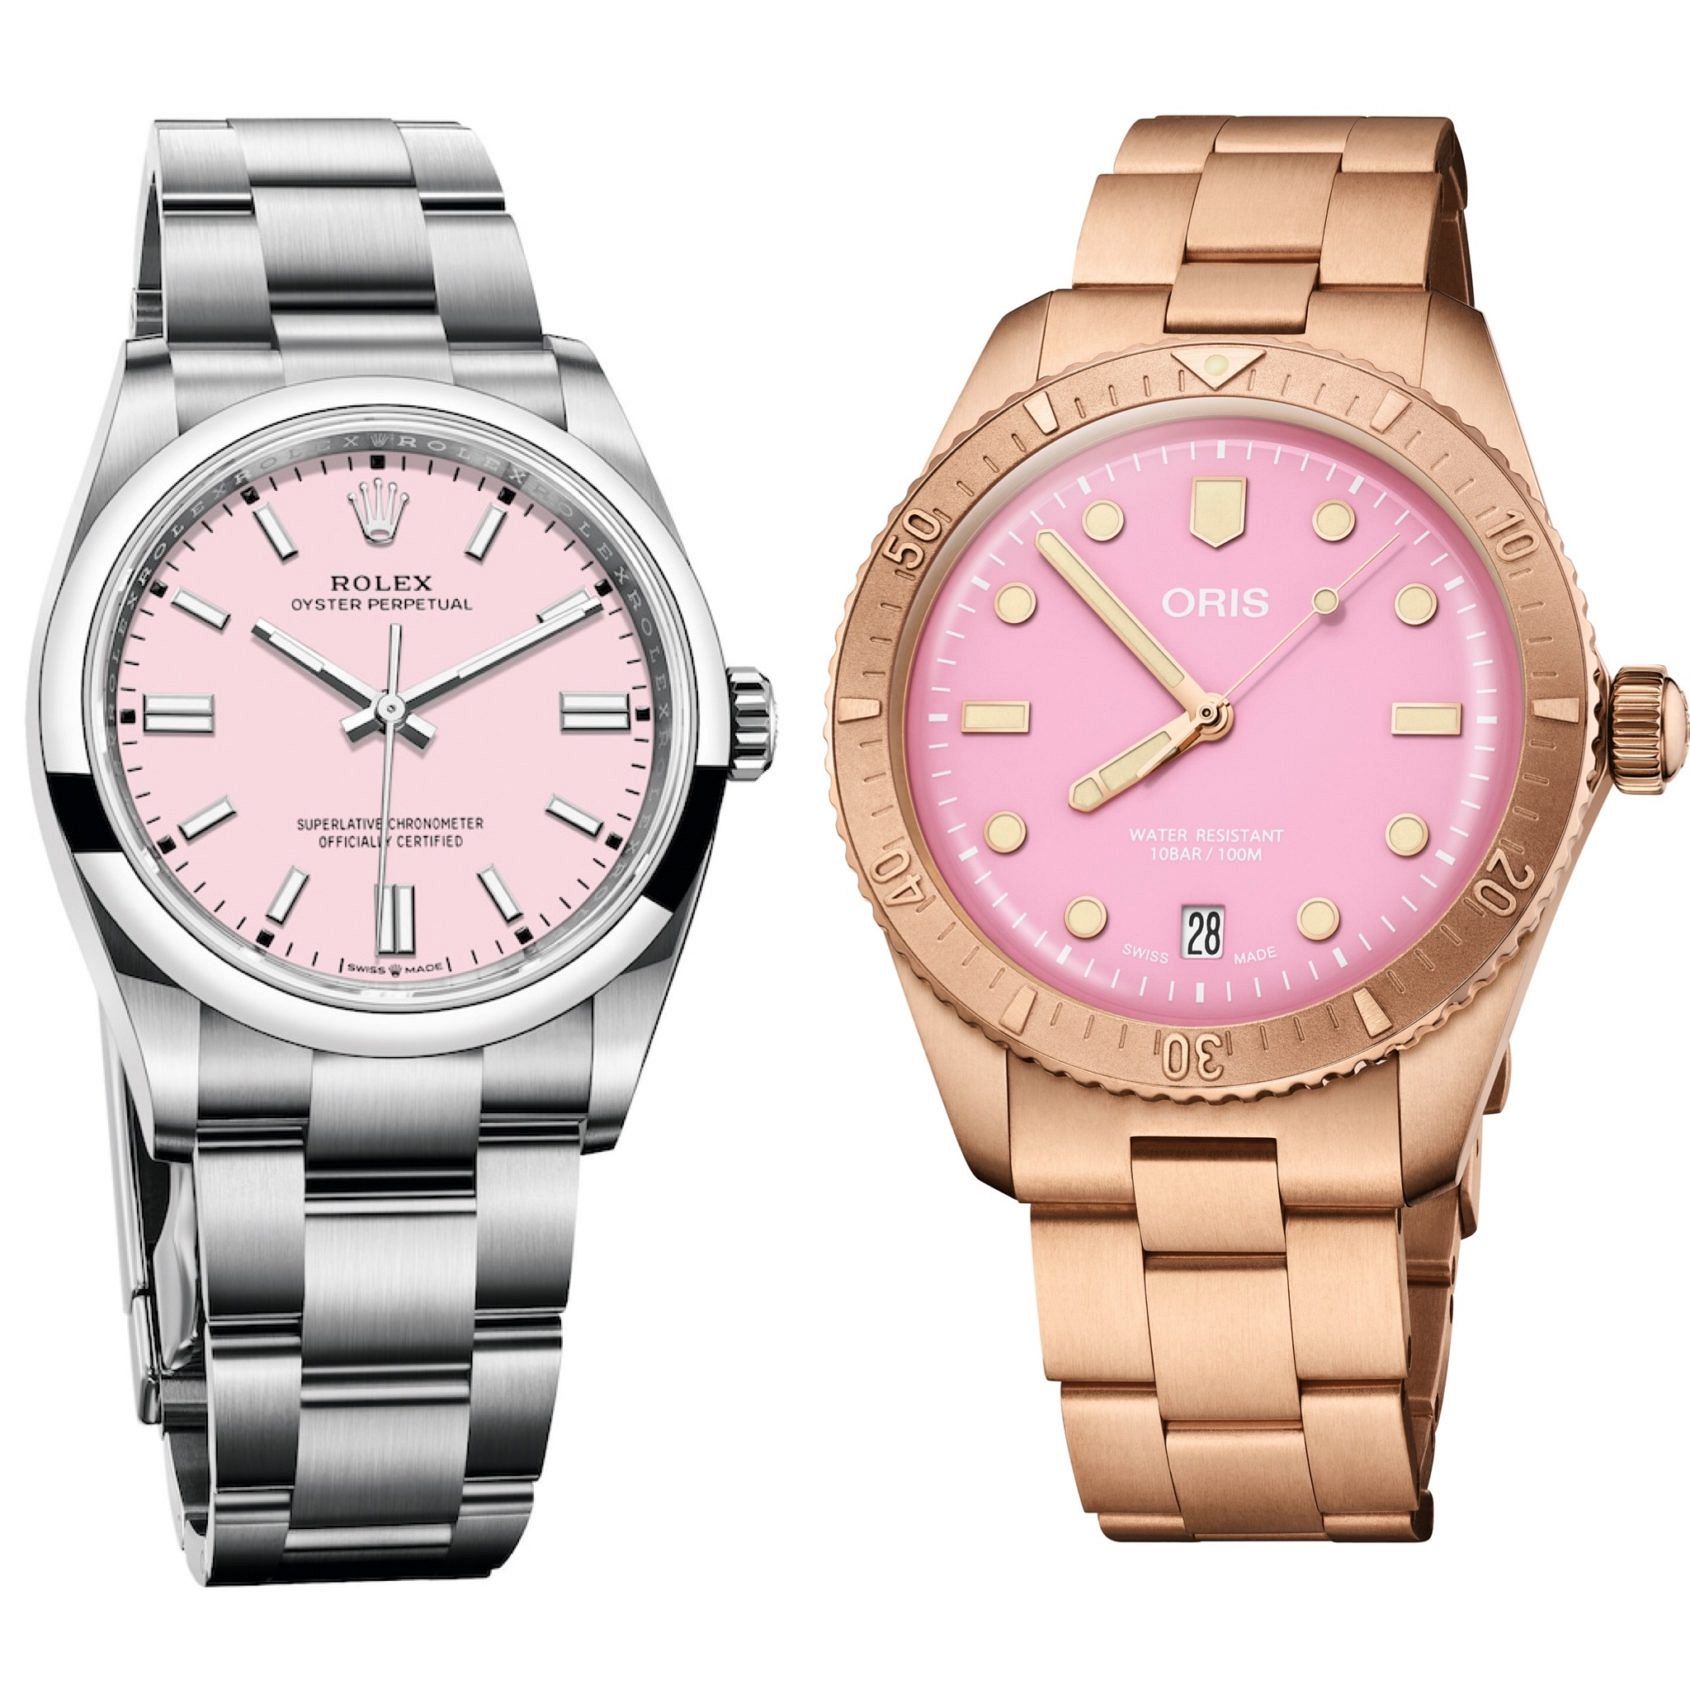 How do the Oris Cotton Candy and Rolex OP dials compare?